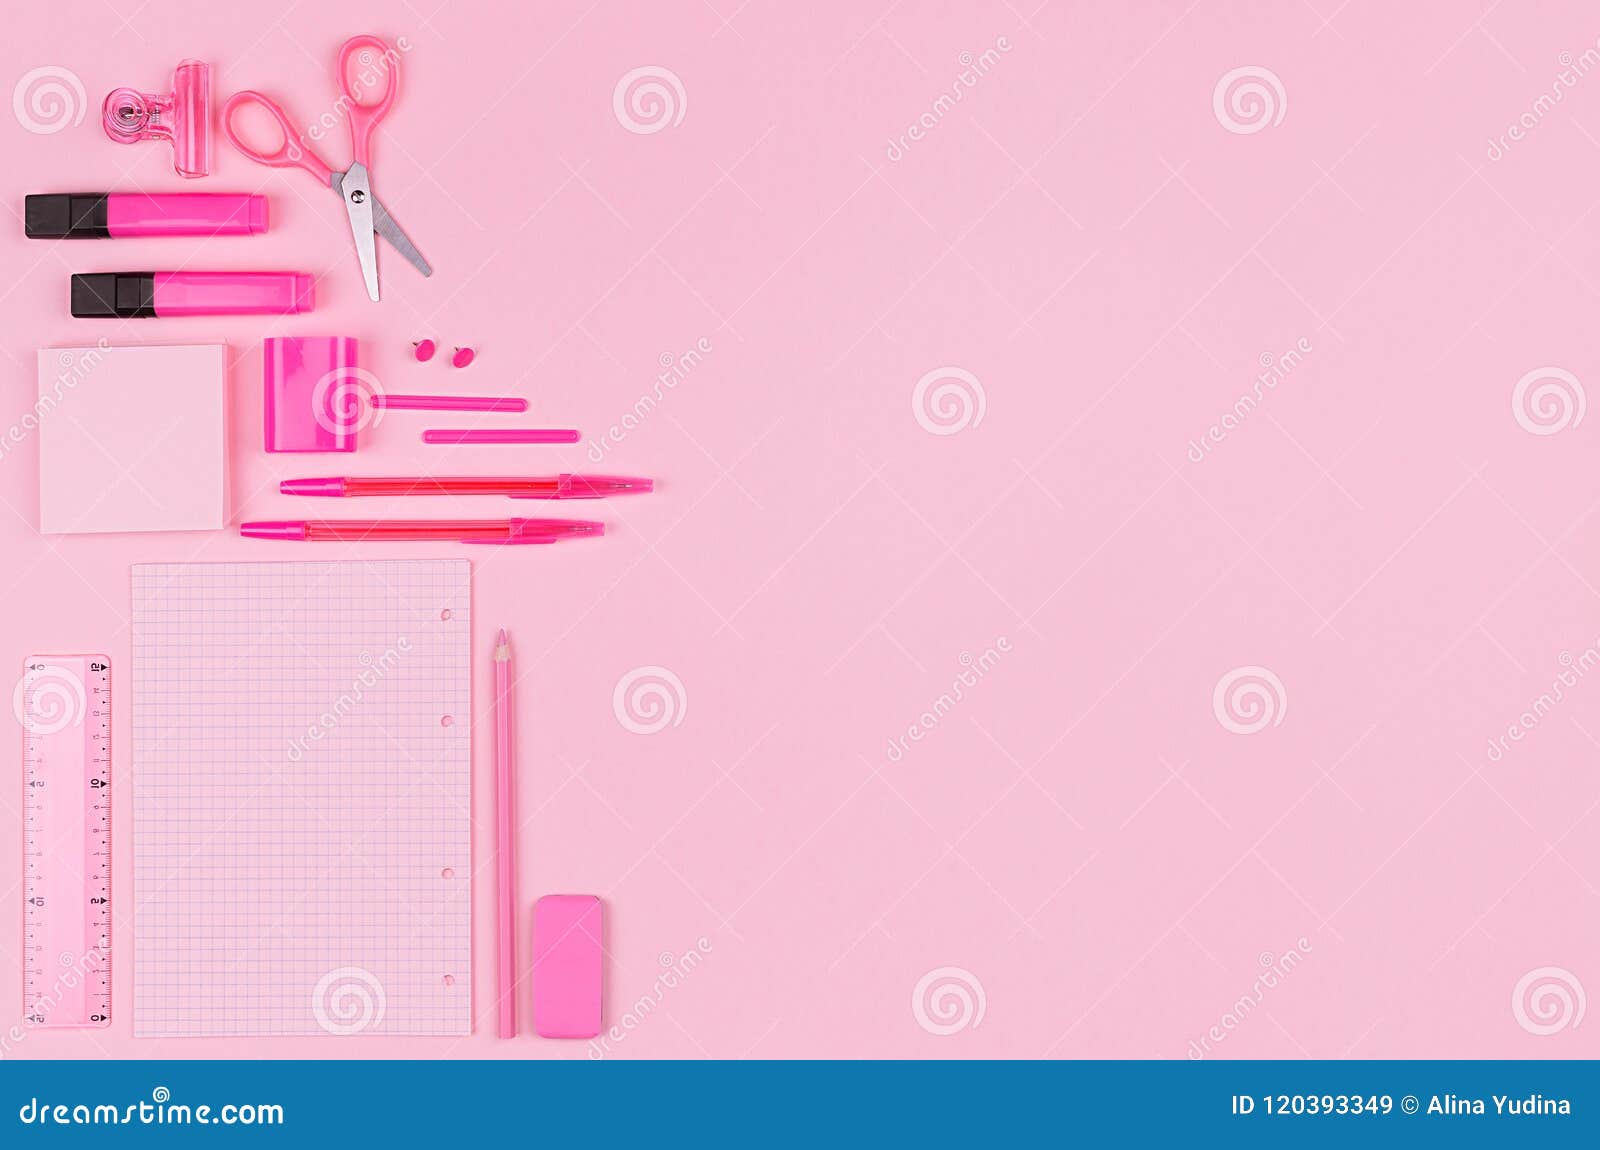 Fashion Stylish Workplace Neon Pink Office Stationery Collection Pastel Background Top View Copy Space Fashion Stylish 120393349 